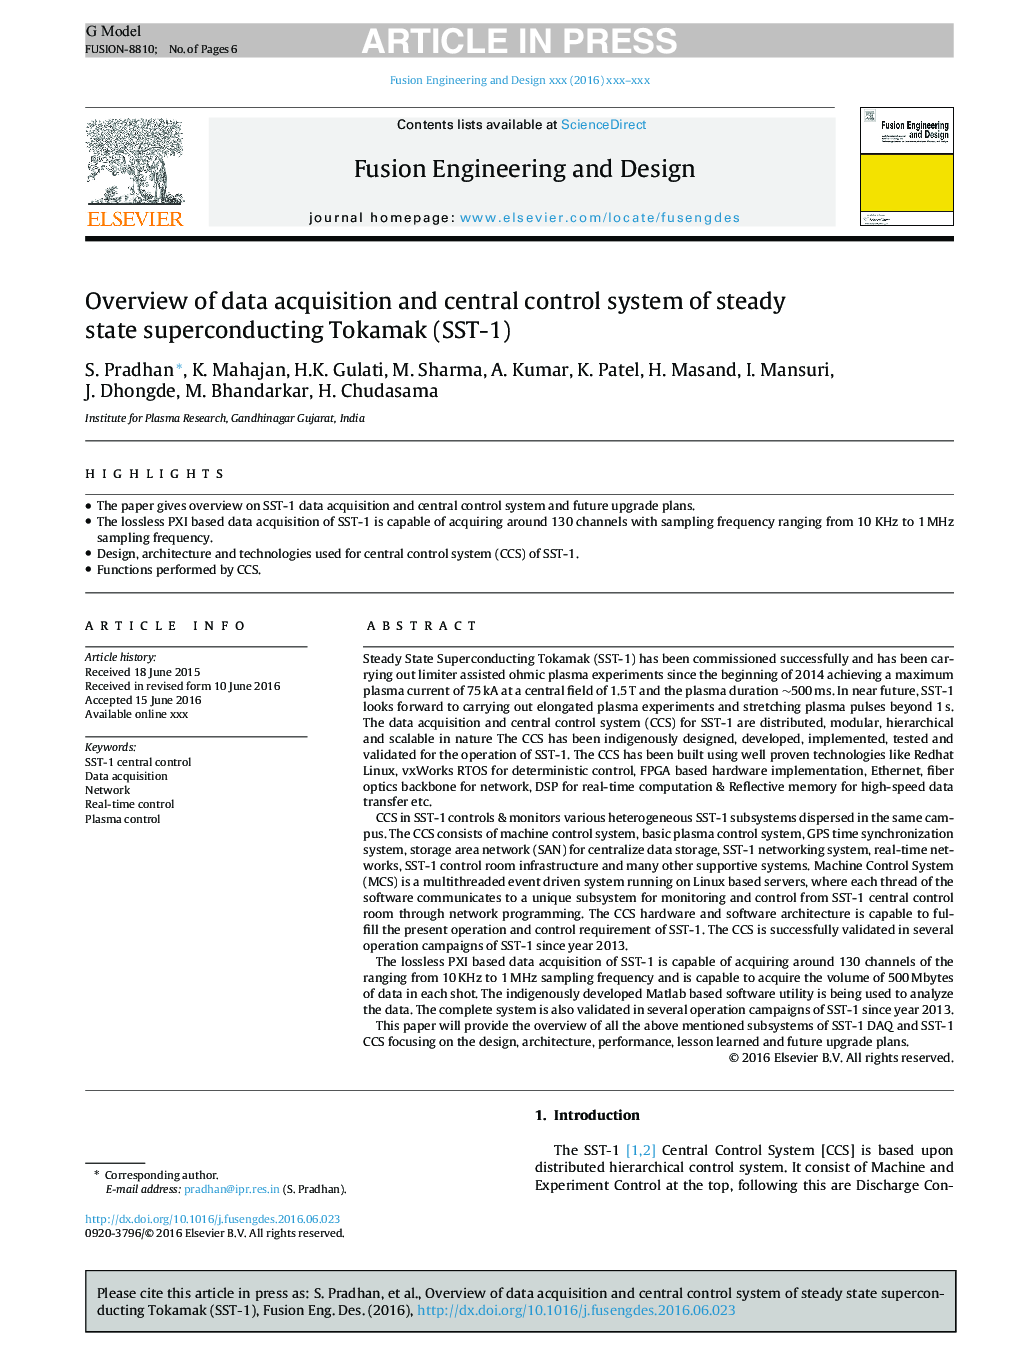 Overview of data acquisition and central control system of steady state superconducting Tokamak (SST-1)